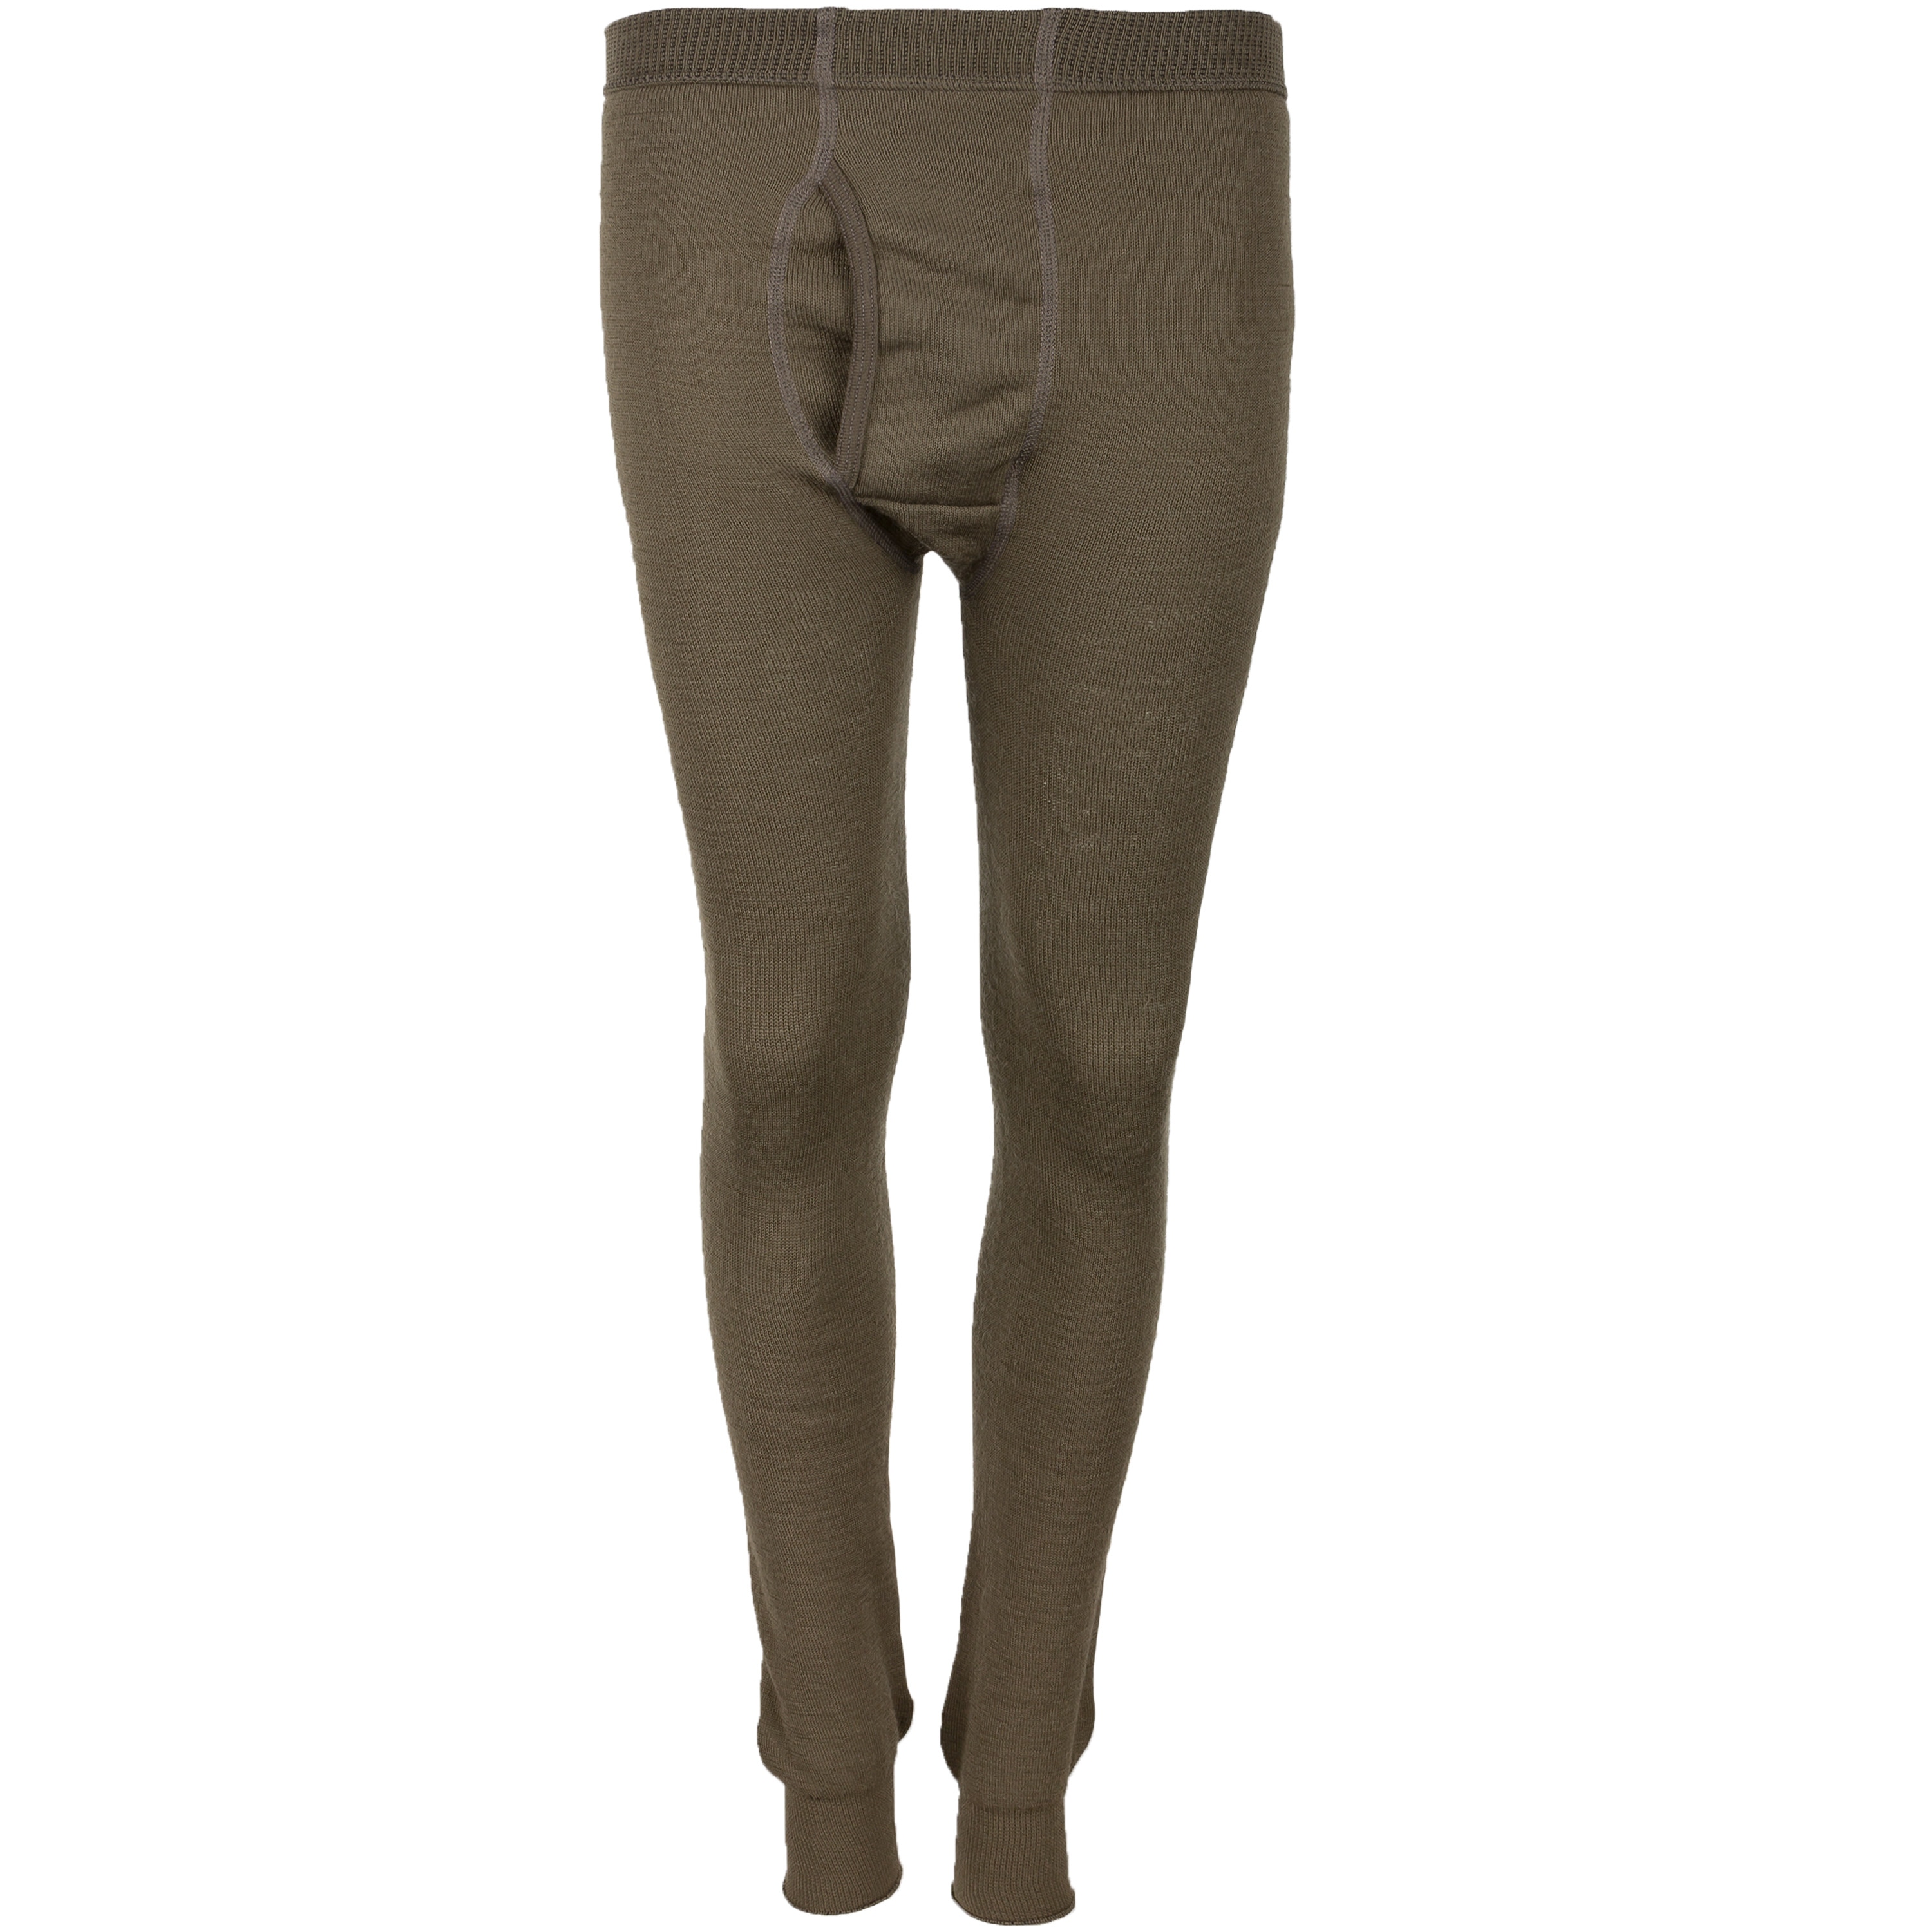 Purchase the Woolpower Long Johns 200 pine green by ASMC